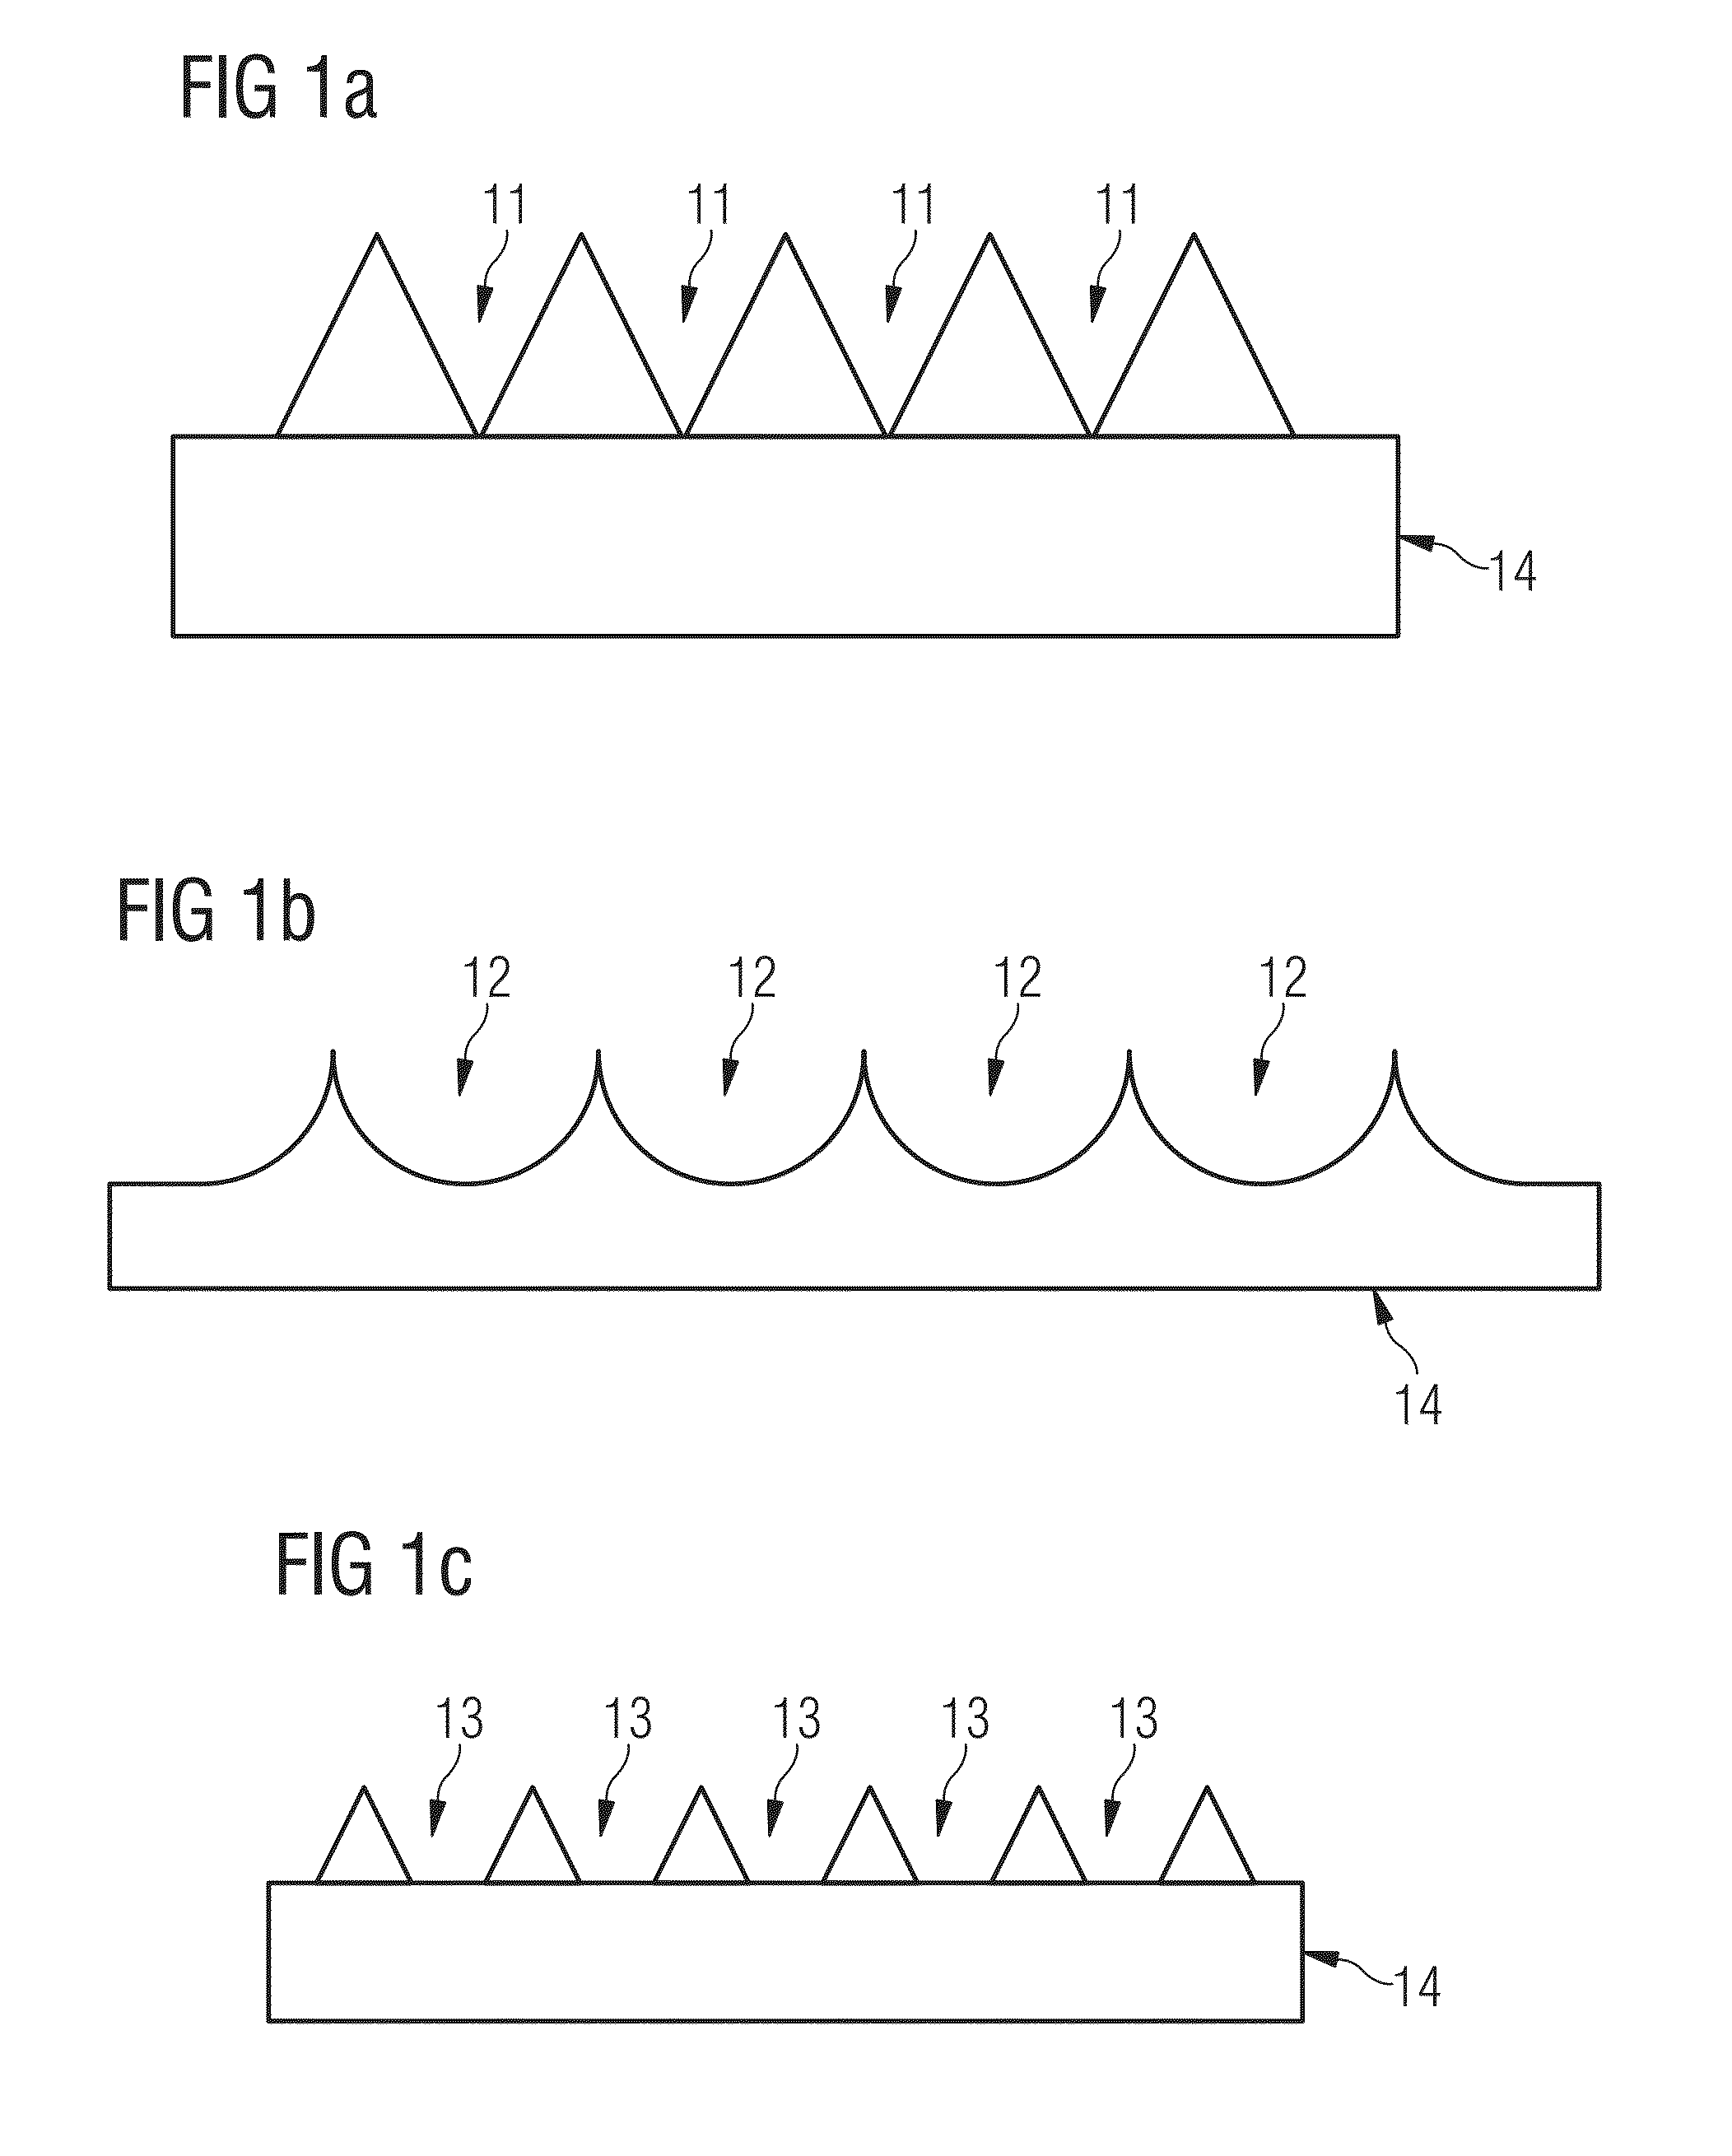 Method for Producing a Surface of a Component, Said Surface Having Reduced Drag and Component with Reduced Drag